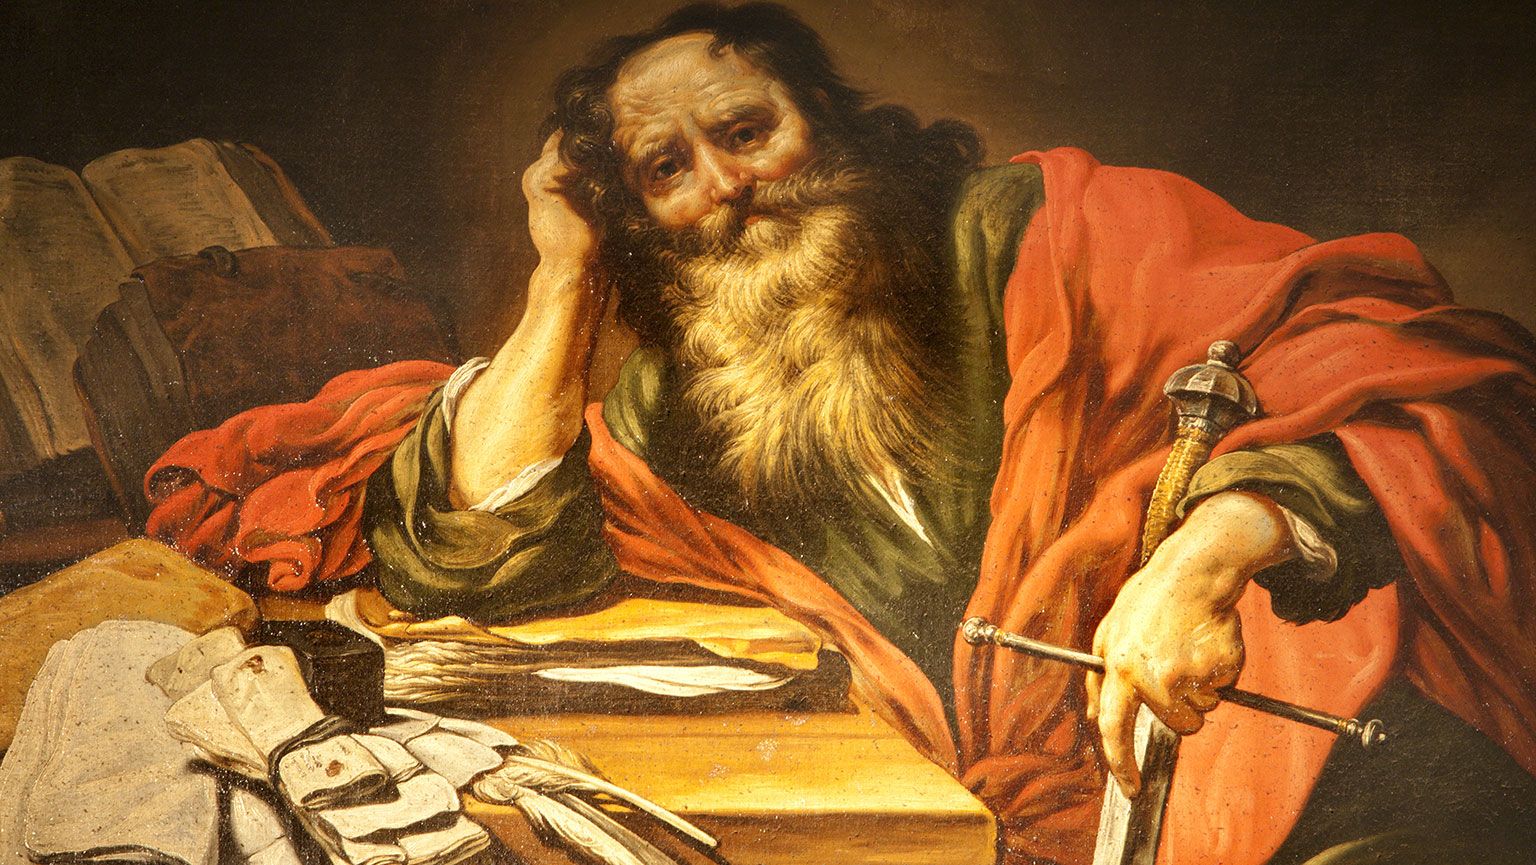 painting of the apostle Paul